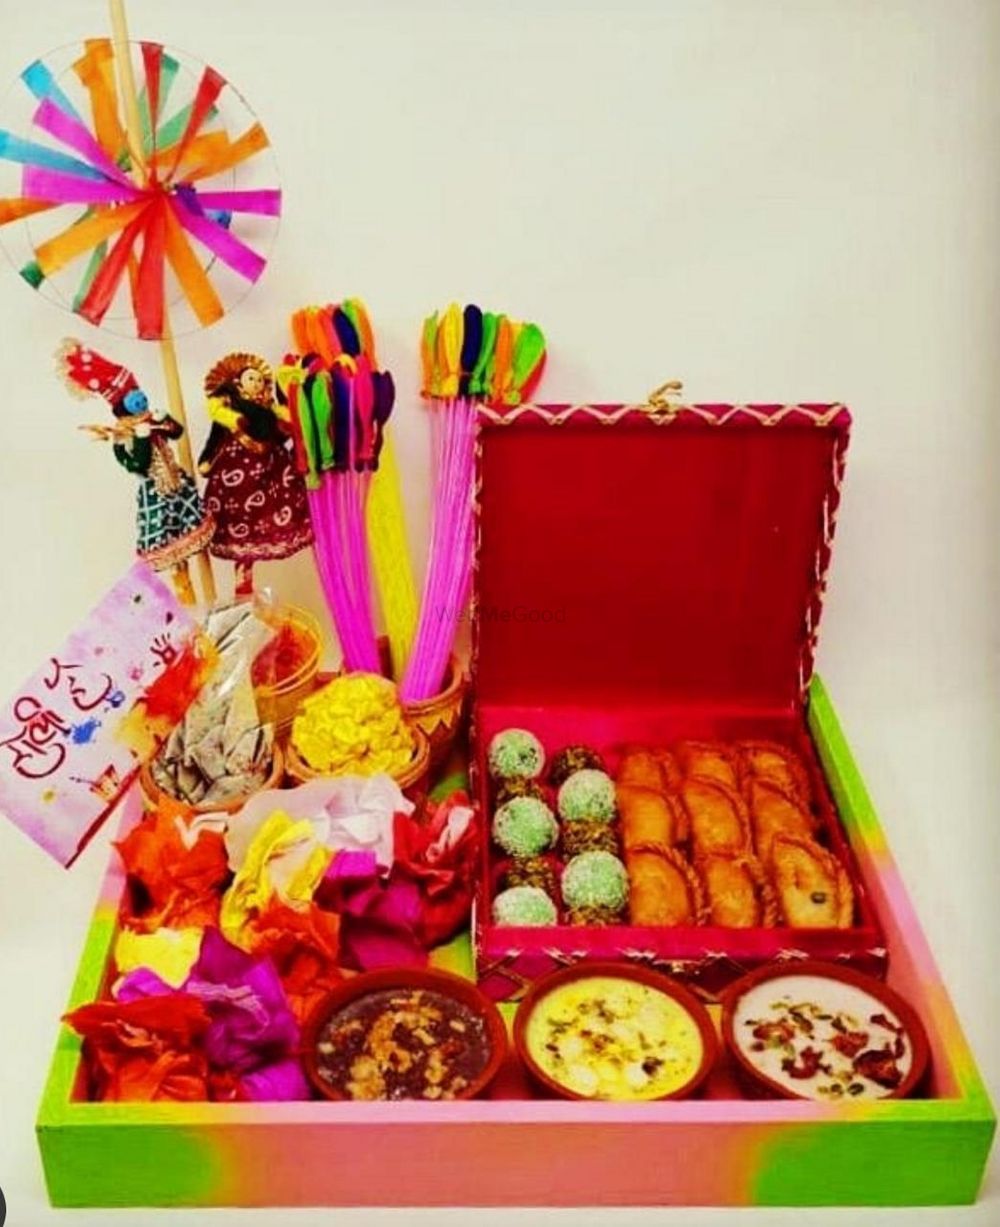 Photo From Holi Hampers - By Stylemaze